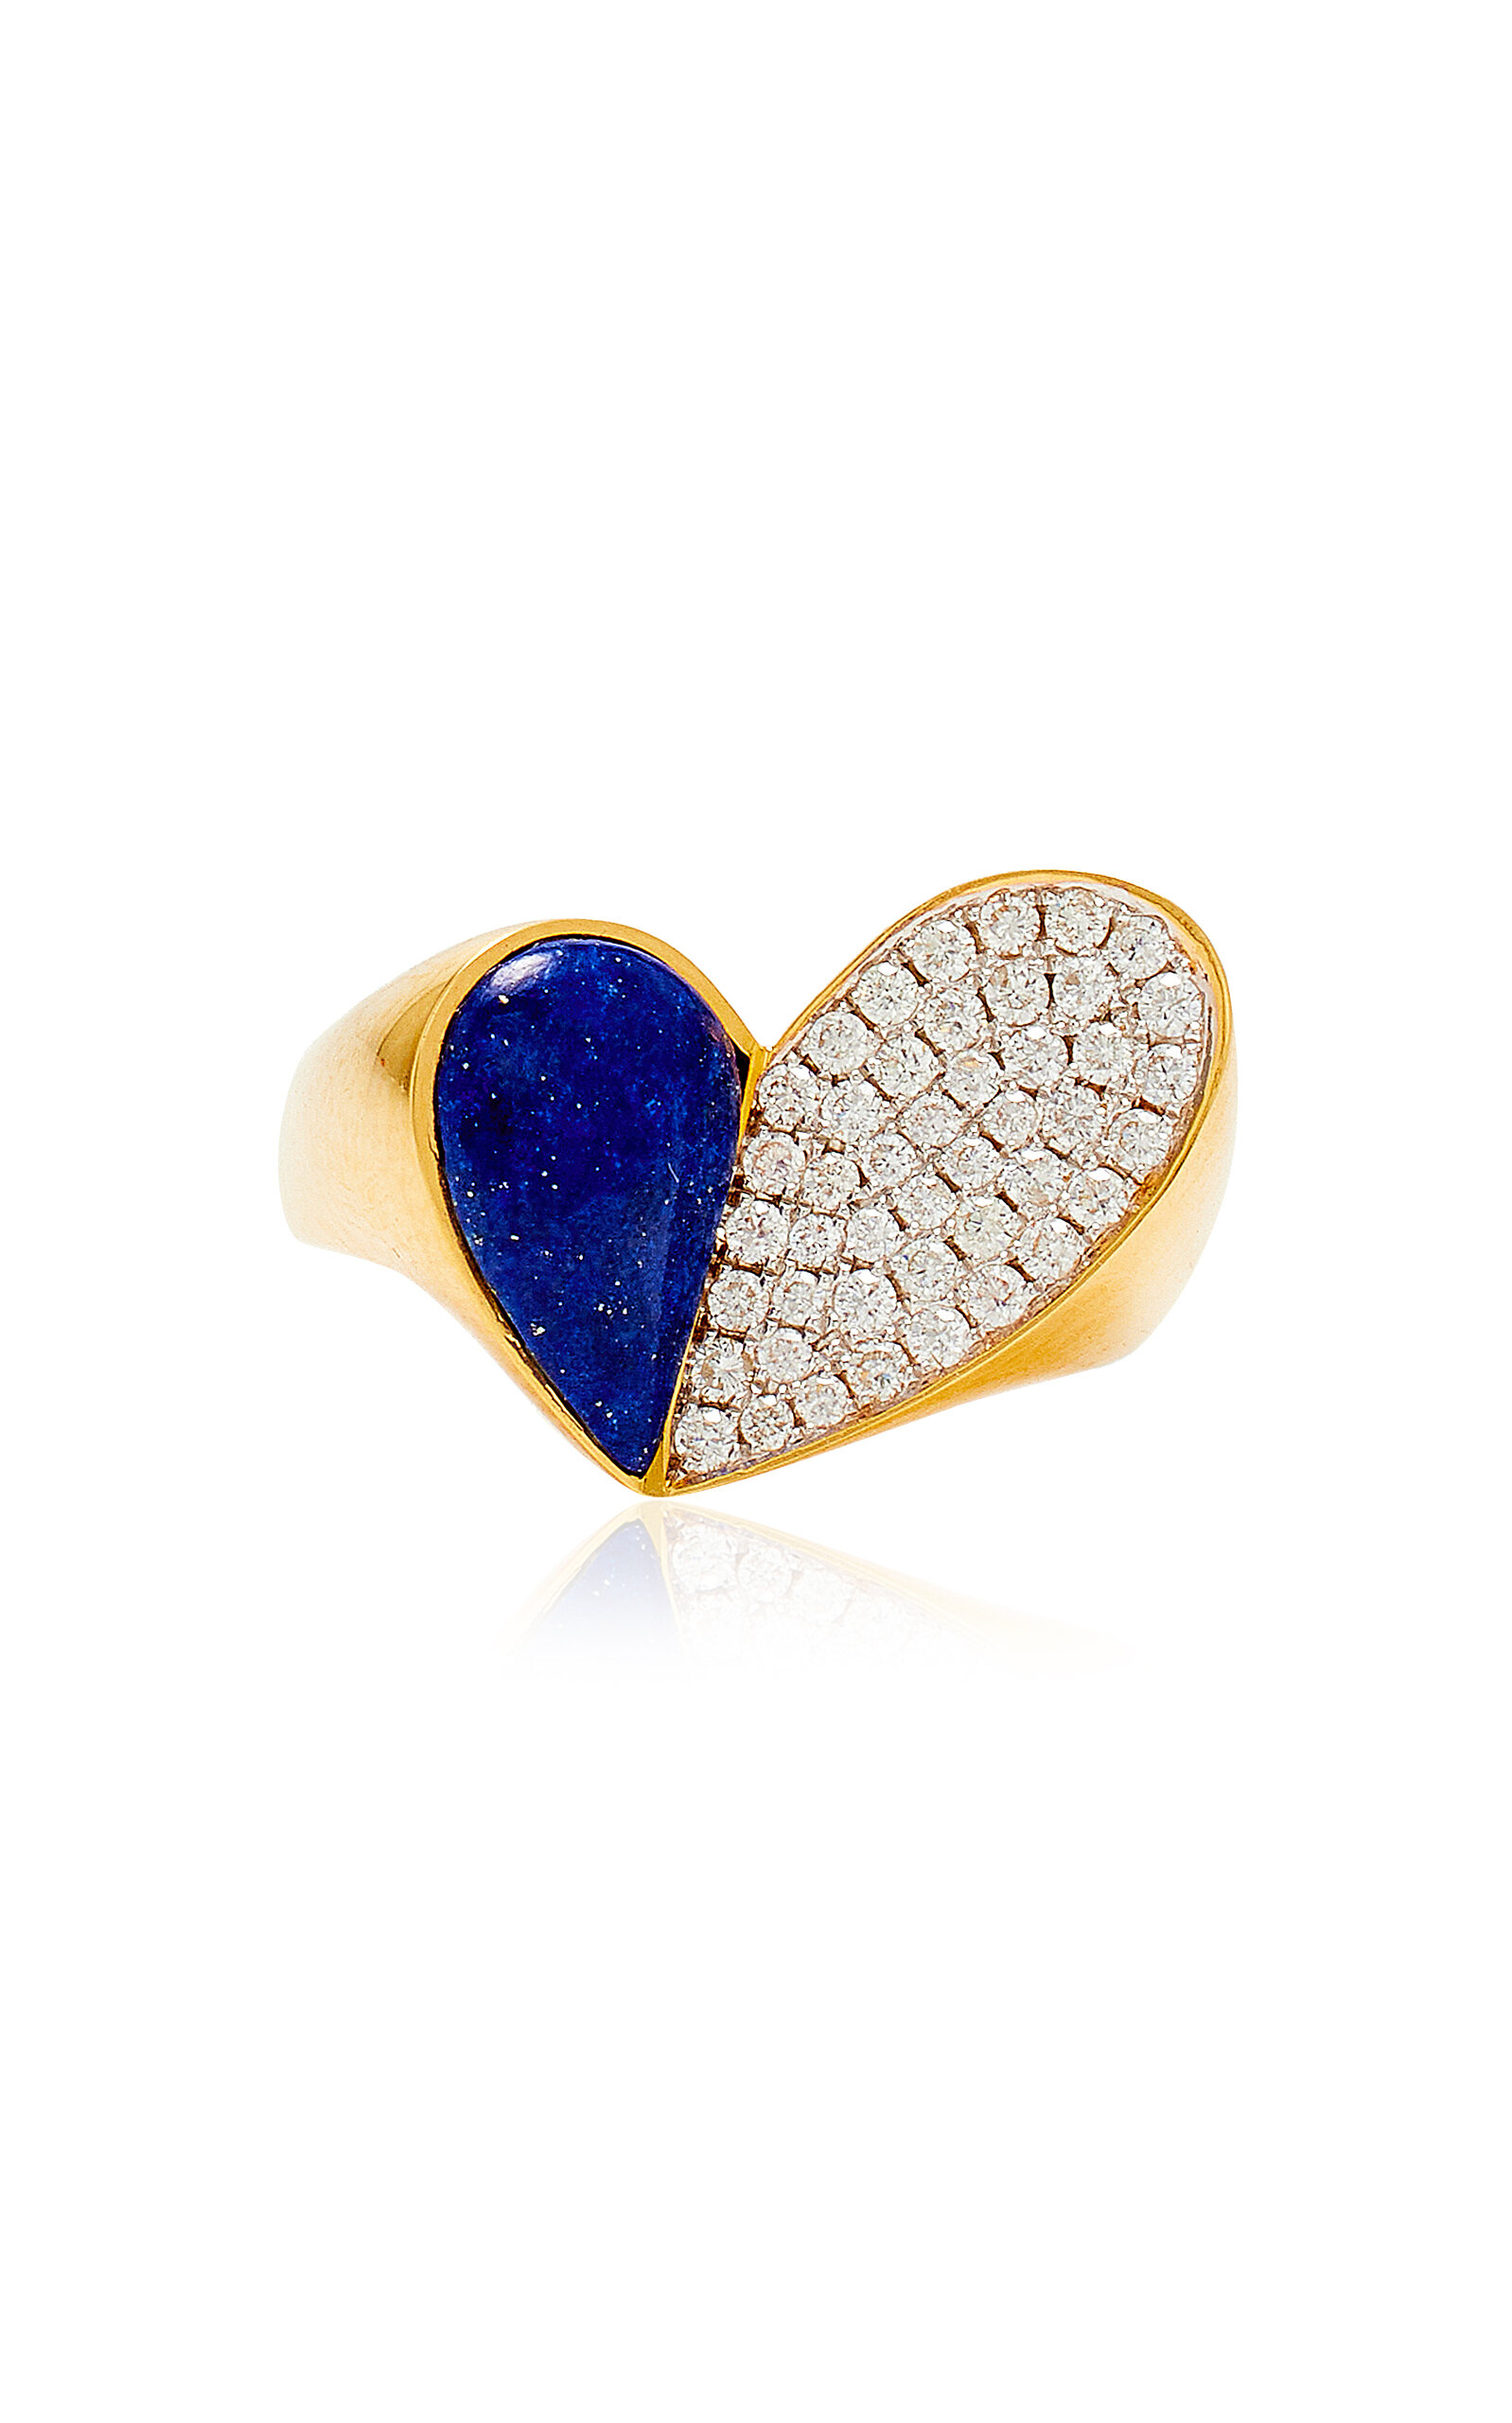 Colette Jewelry Women's 18K Yellow Gold Diamond And Lapis Heart Ring